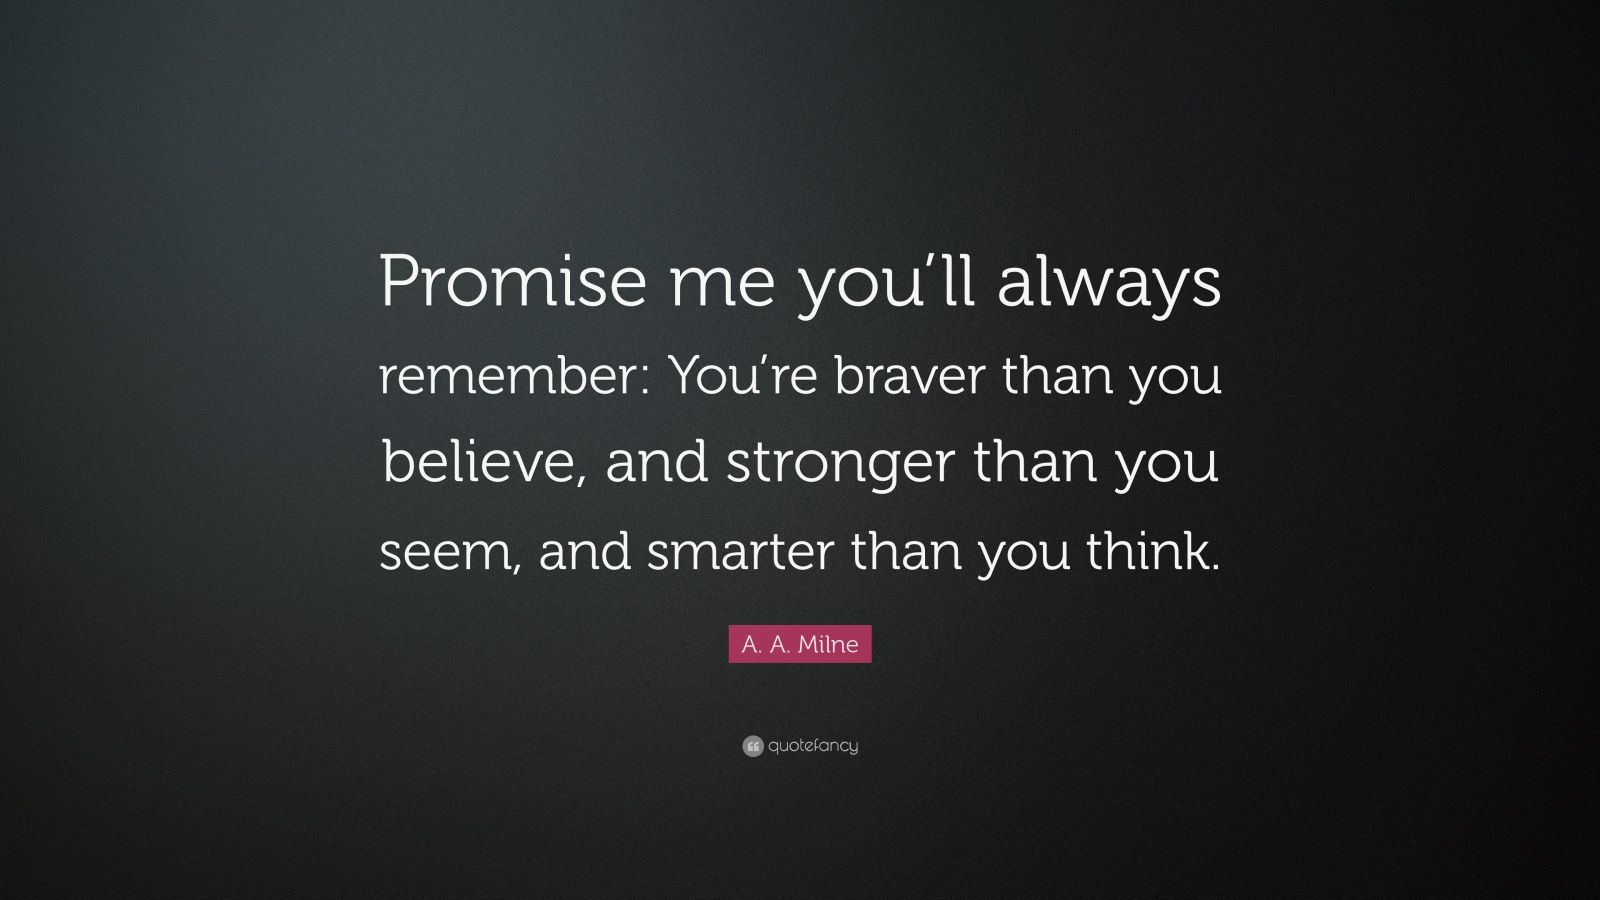 A. A. Milne Quote: "Promise me you'll always remember: You're braver than you believe, and ...